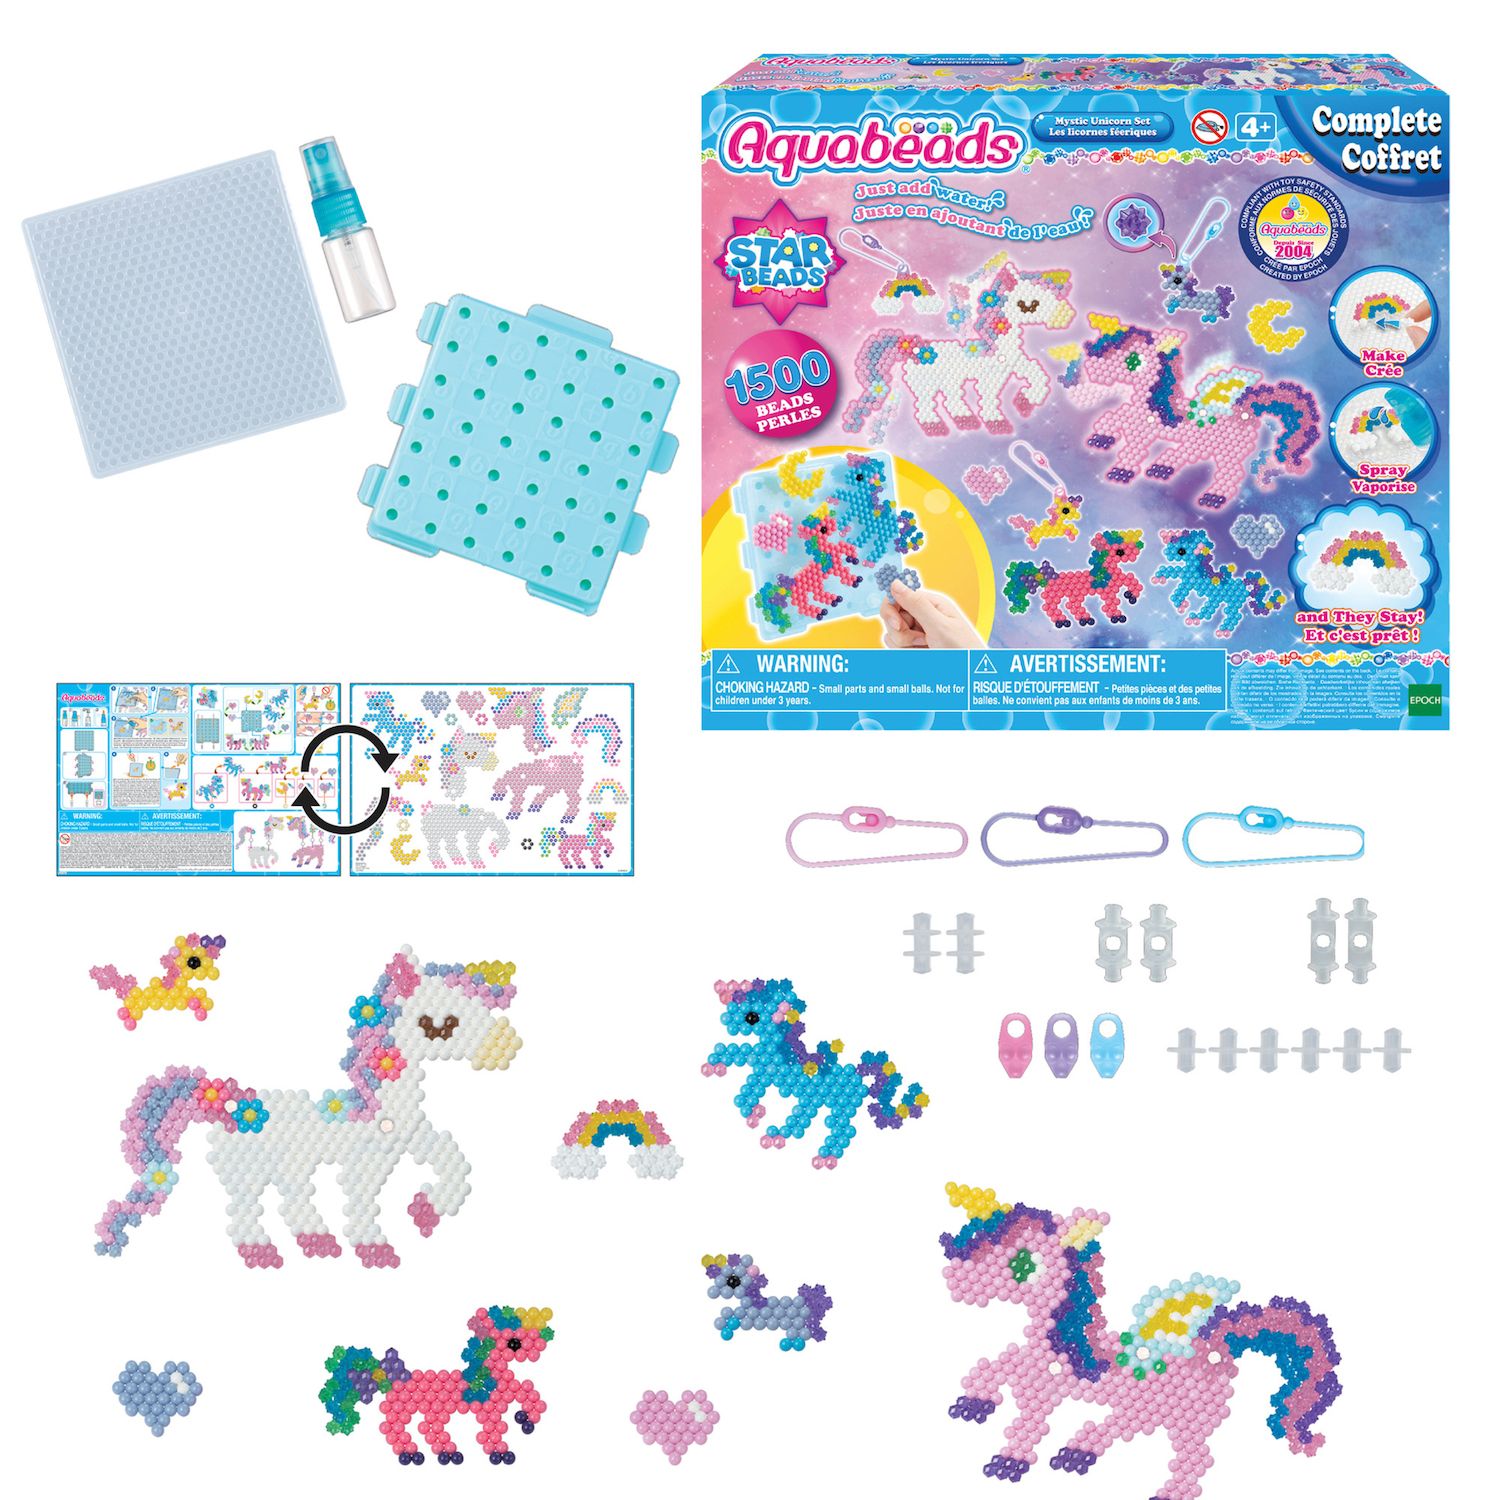 Aquabeads Star Bead Station Craft Set NEW IN STOCK